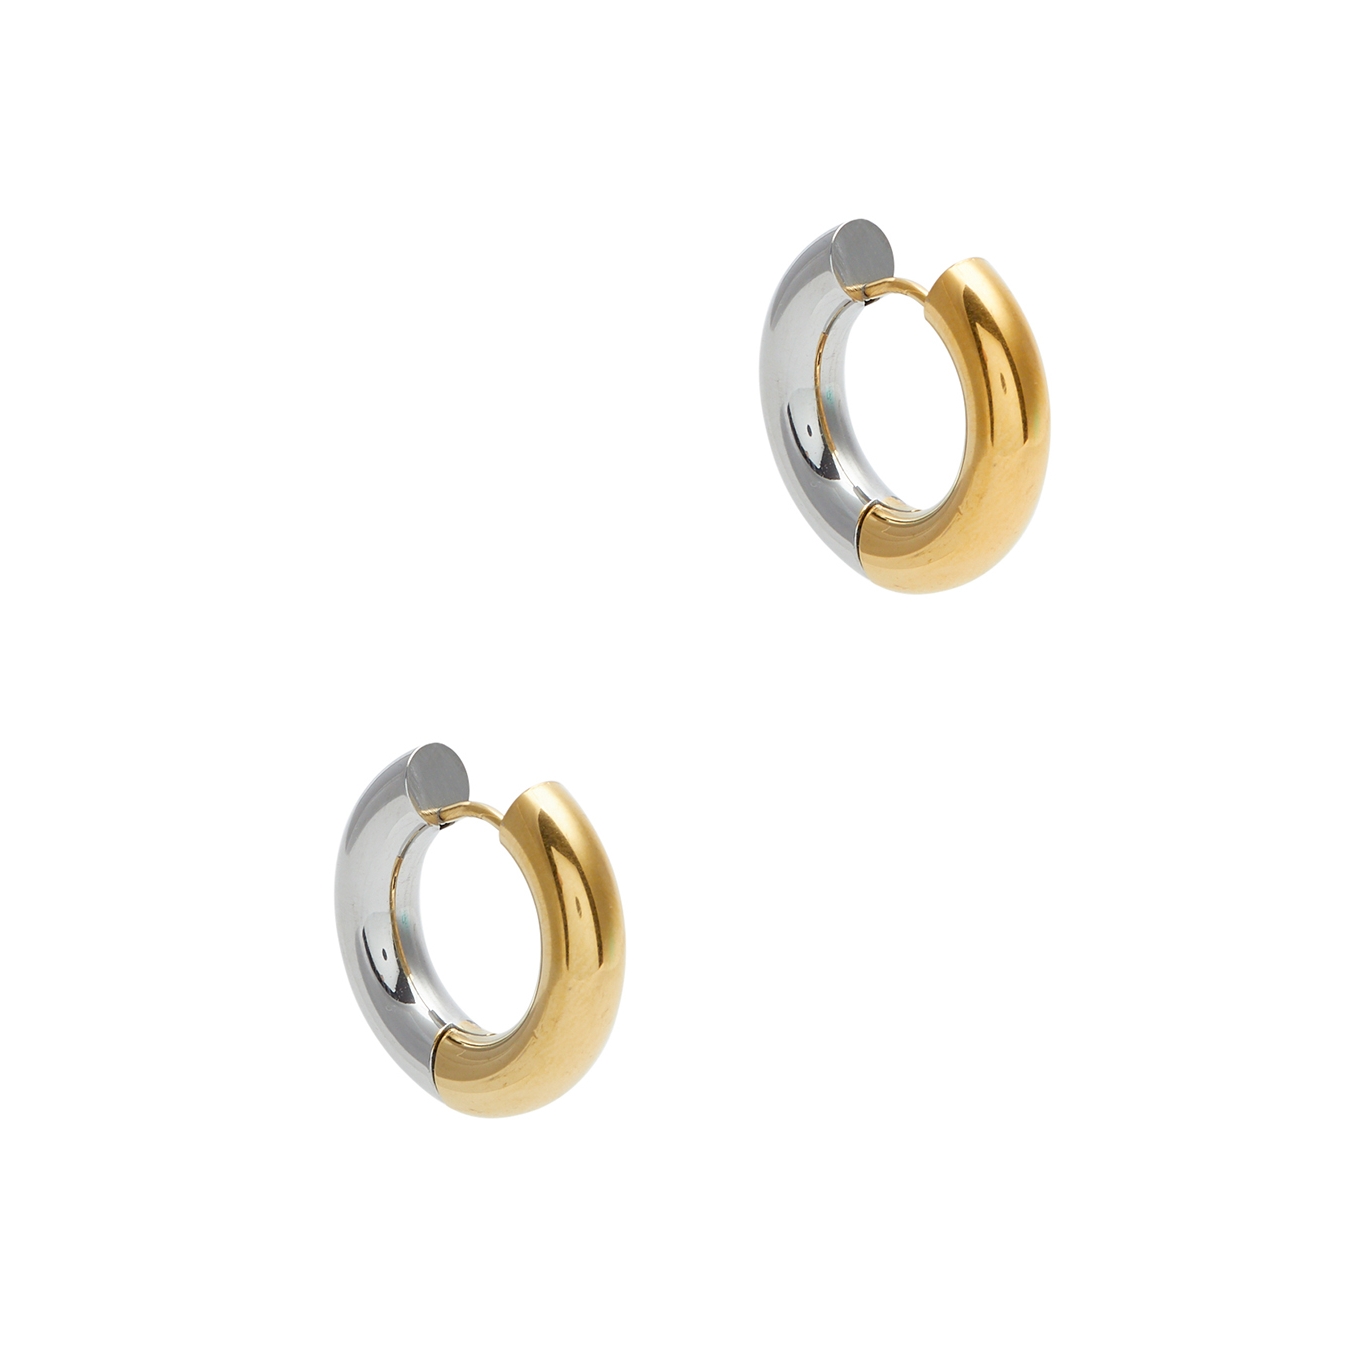 Fallon Two-tone 18kt Gold And Rhodium-plated Hoop Earrings